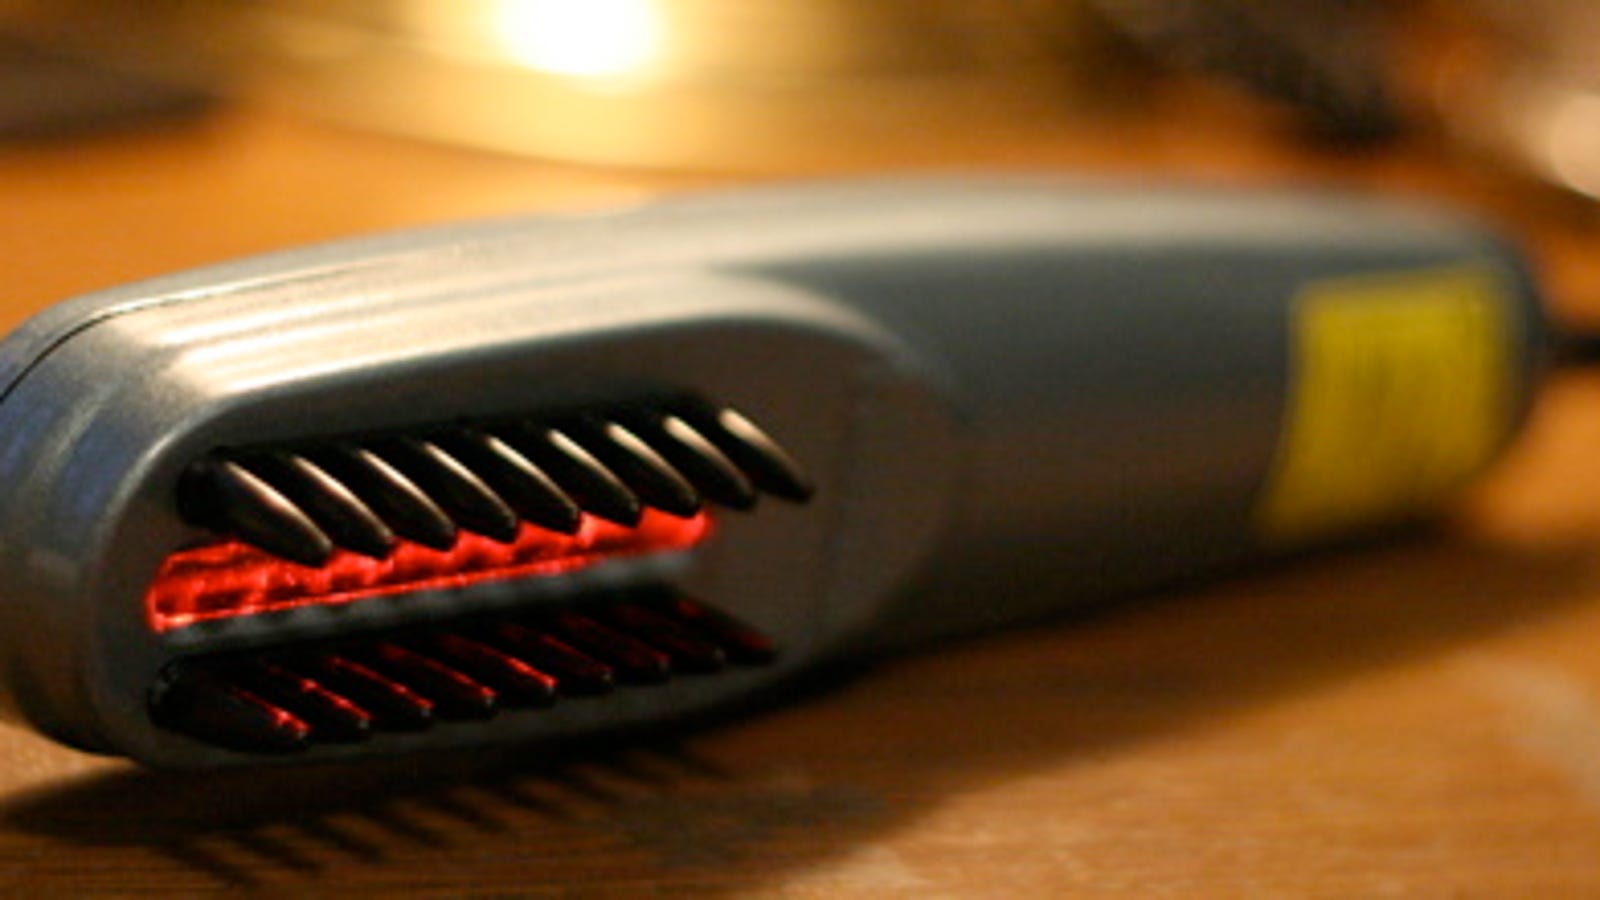 hairmax laser comb instructions